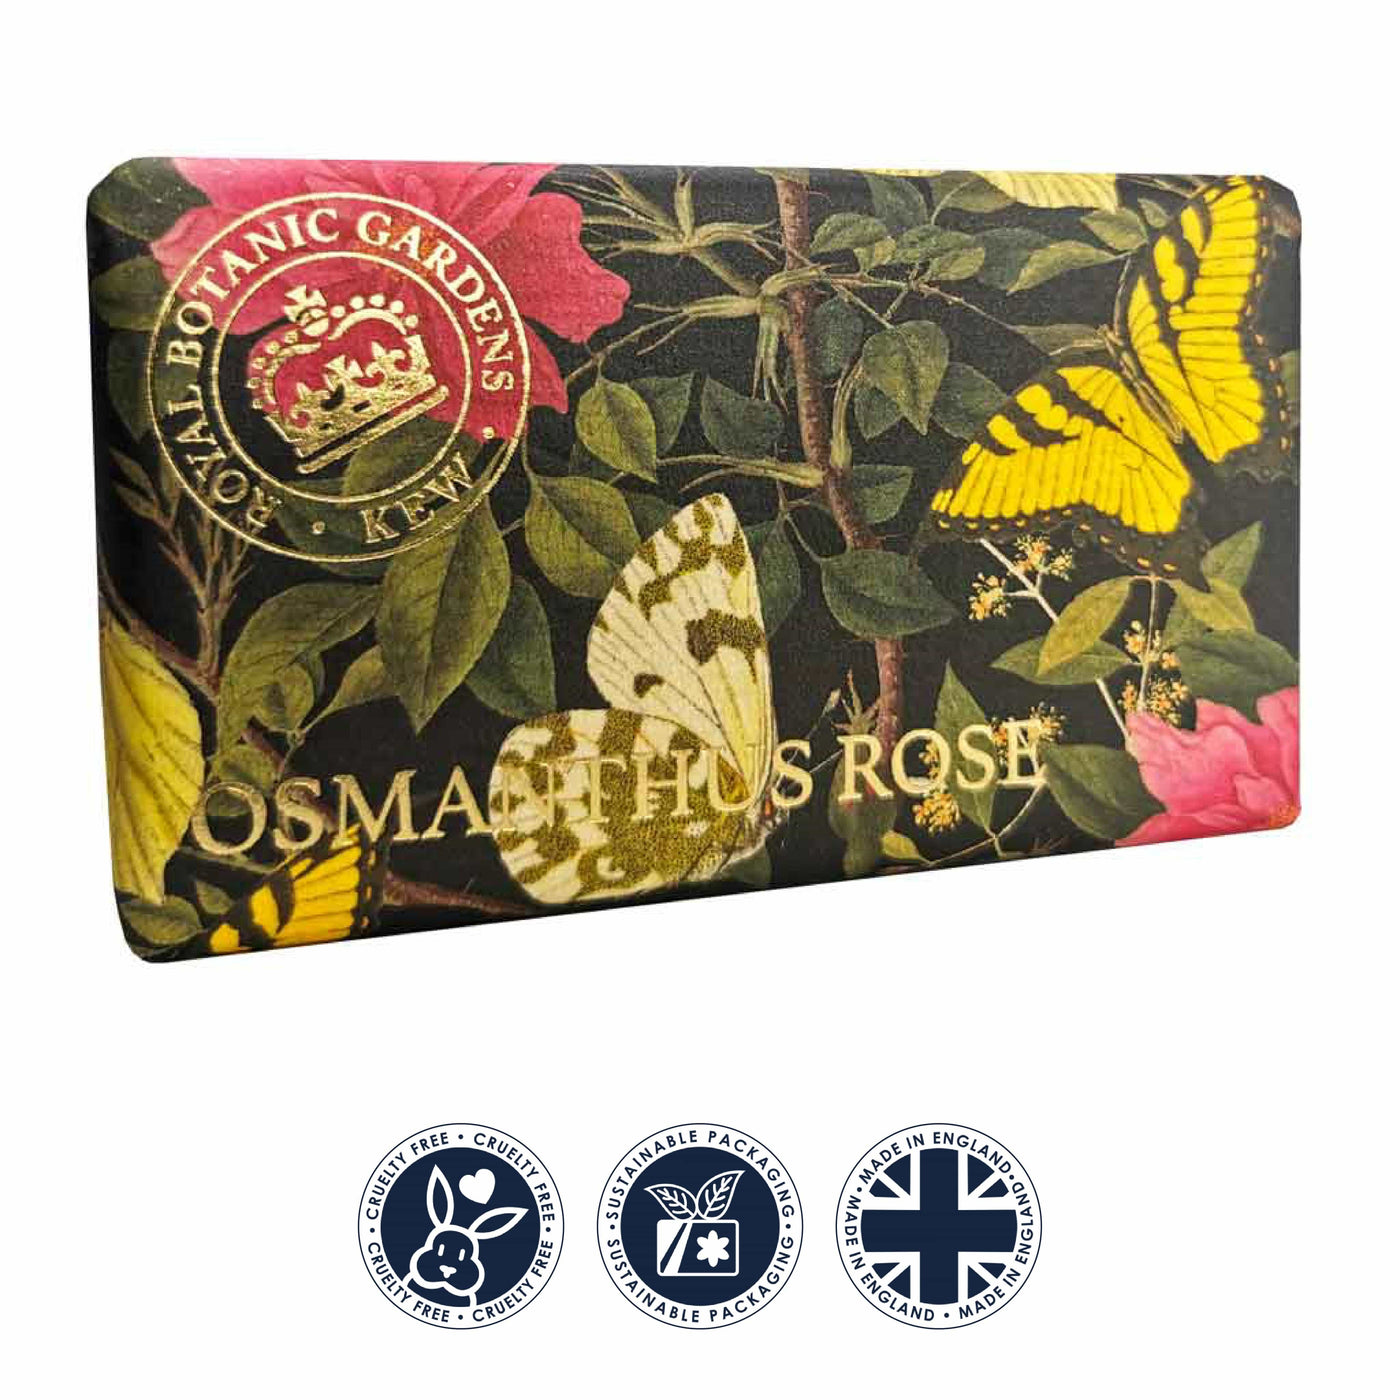 Kew Gardens Osmanthus Rose Soap Bar from our Luxury Bar Soap collection by The English Soap Company